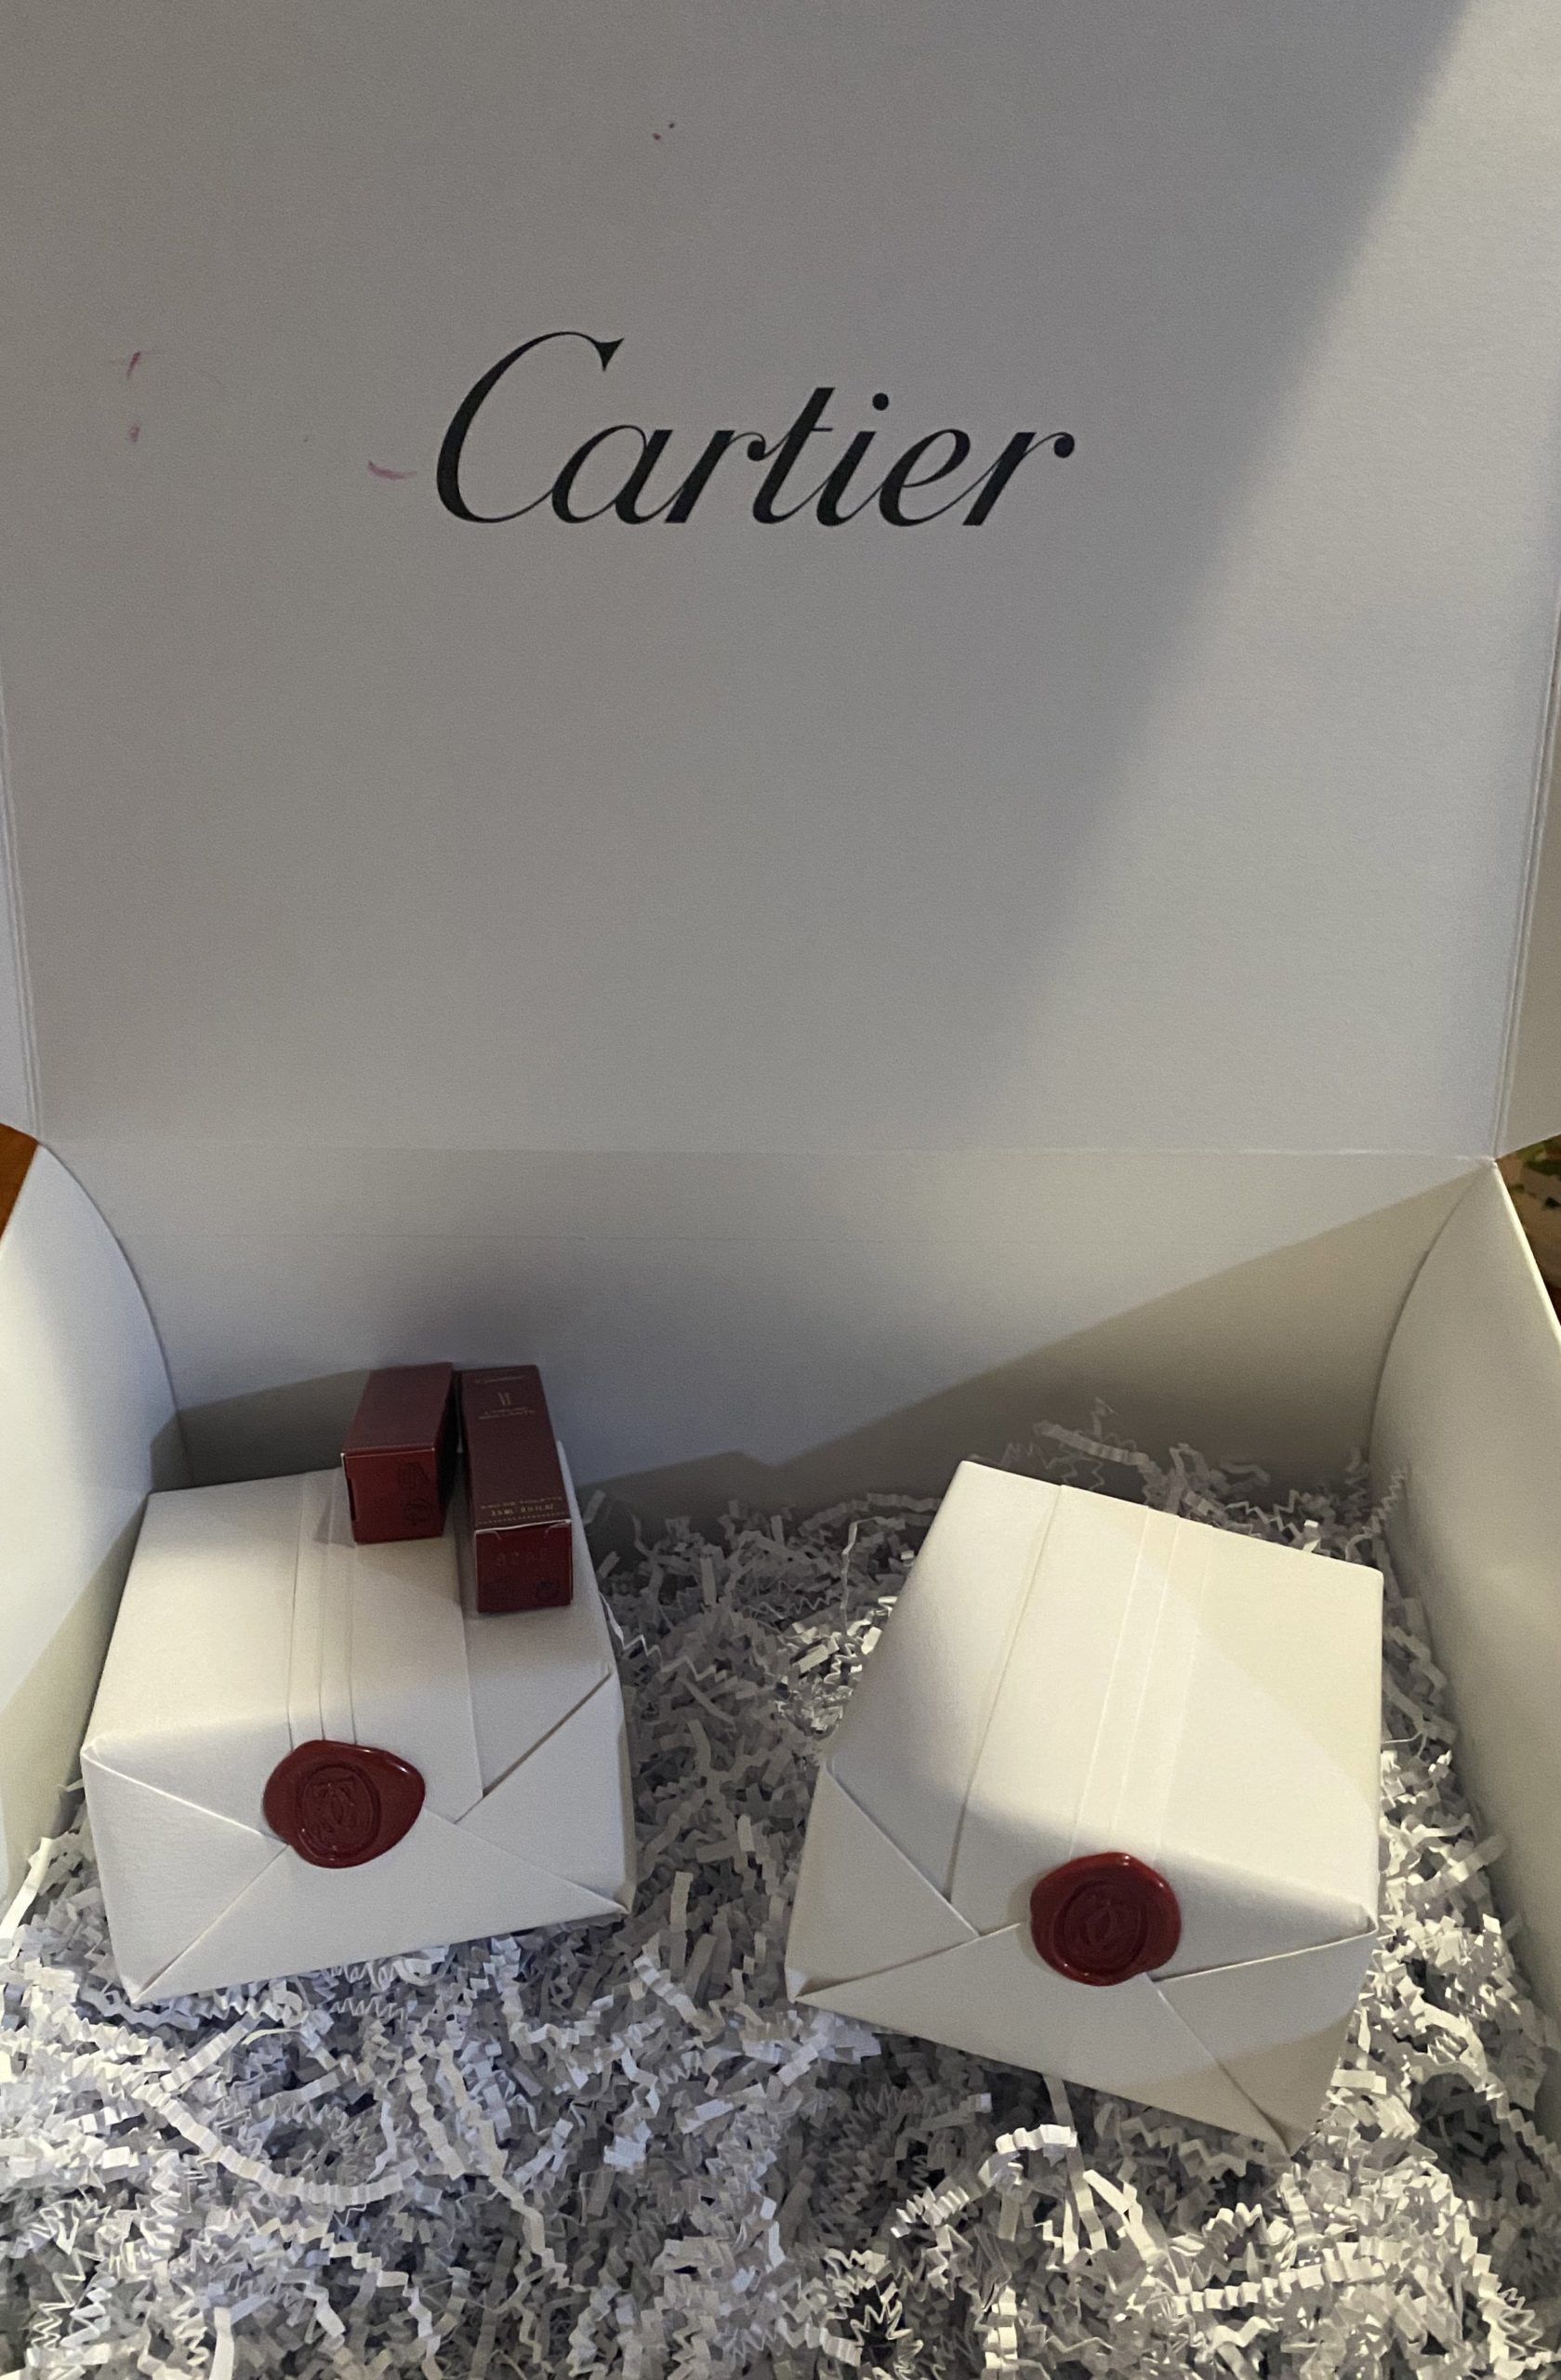 Man in Mexico sues jeweller Cartier after brand refuses to hand over S$19K earrings listed at S$19